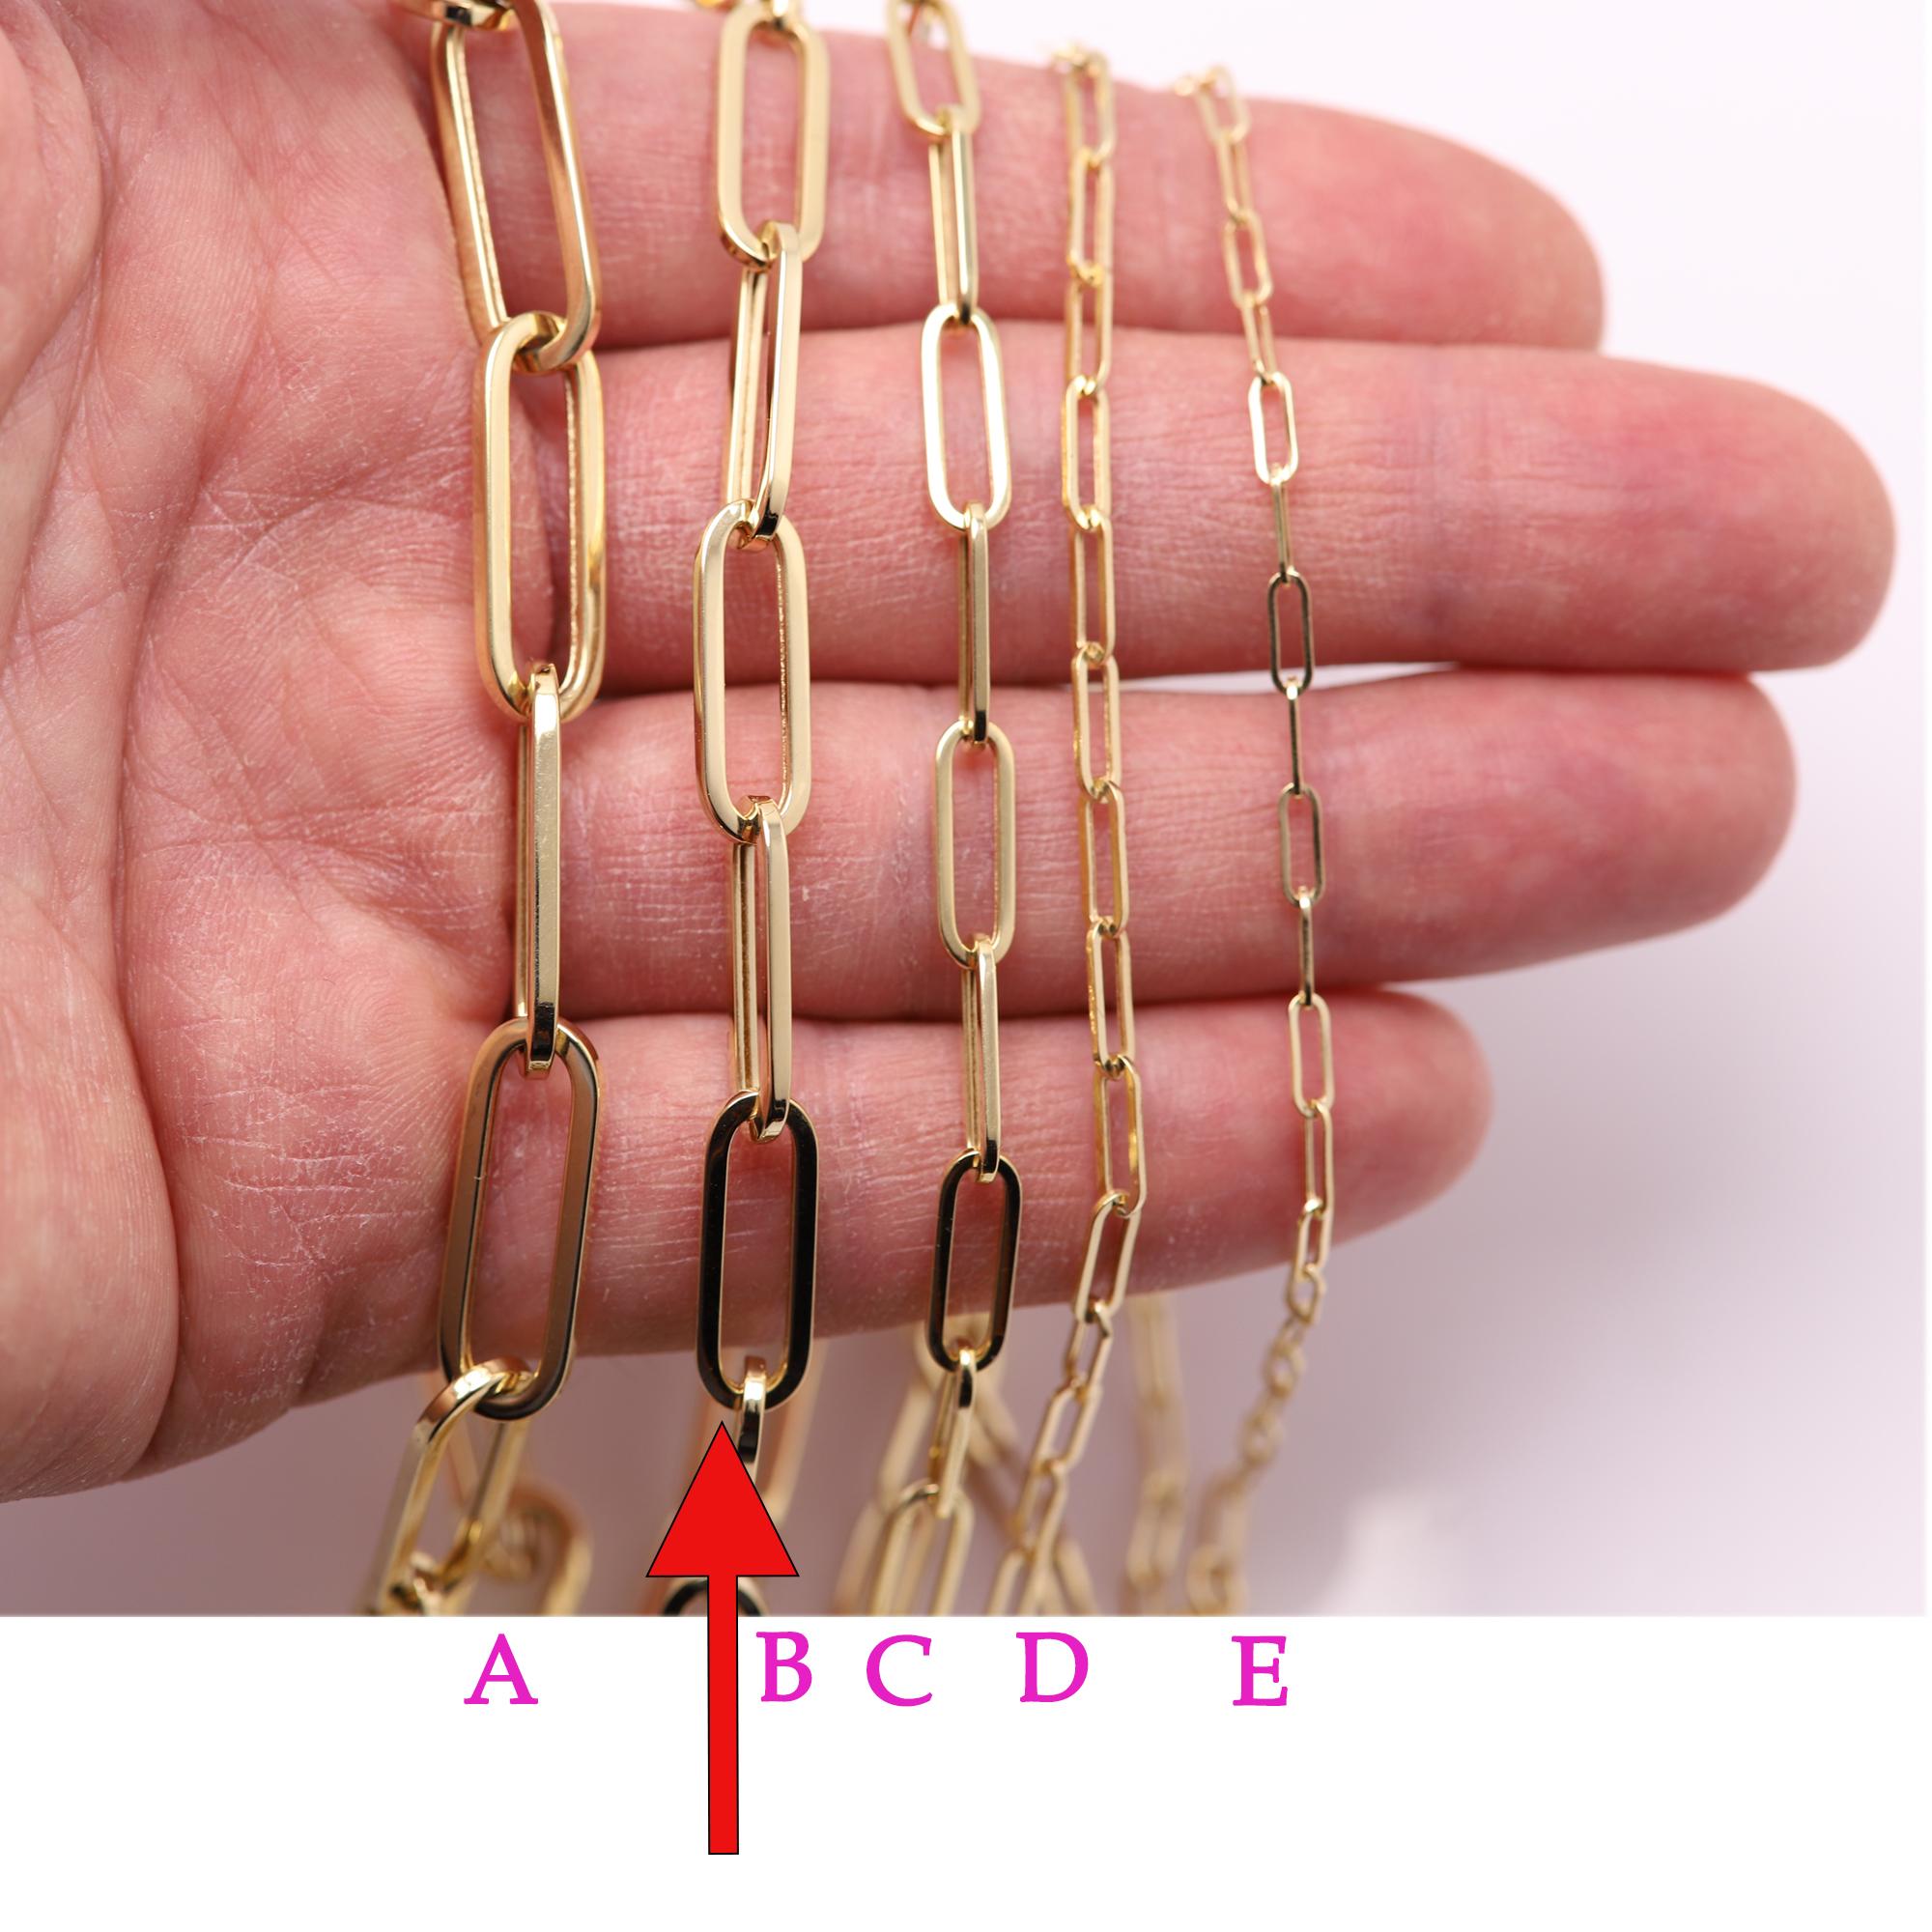 Very Trendy Link Chain called Paper Clip Link Chain
This Particular style is 7mm width/thick.
Made In Italy - Real 14k Yellow Gold  12.60 grams
Chain Length is 18' Inch
Individual links are  20mm x 7.0mm and 1.5mm thick 

+Gift Box Included

the